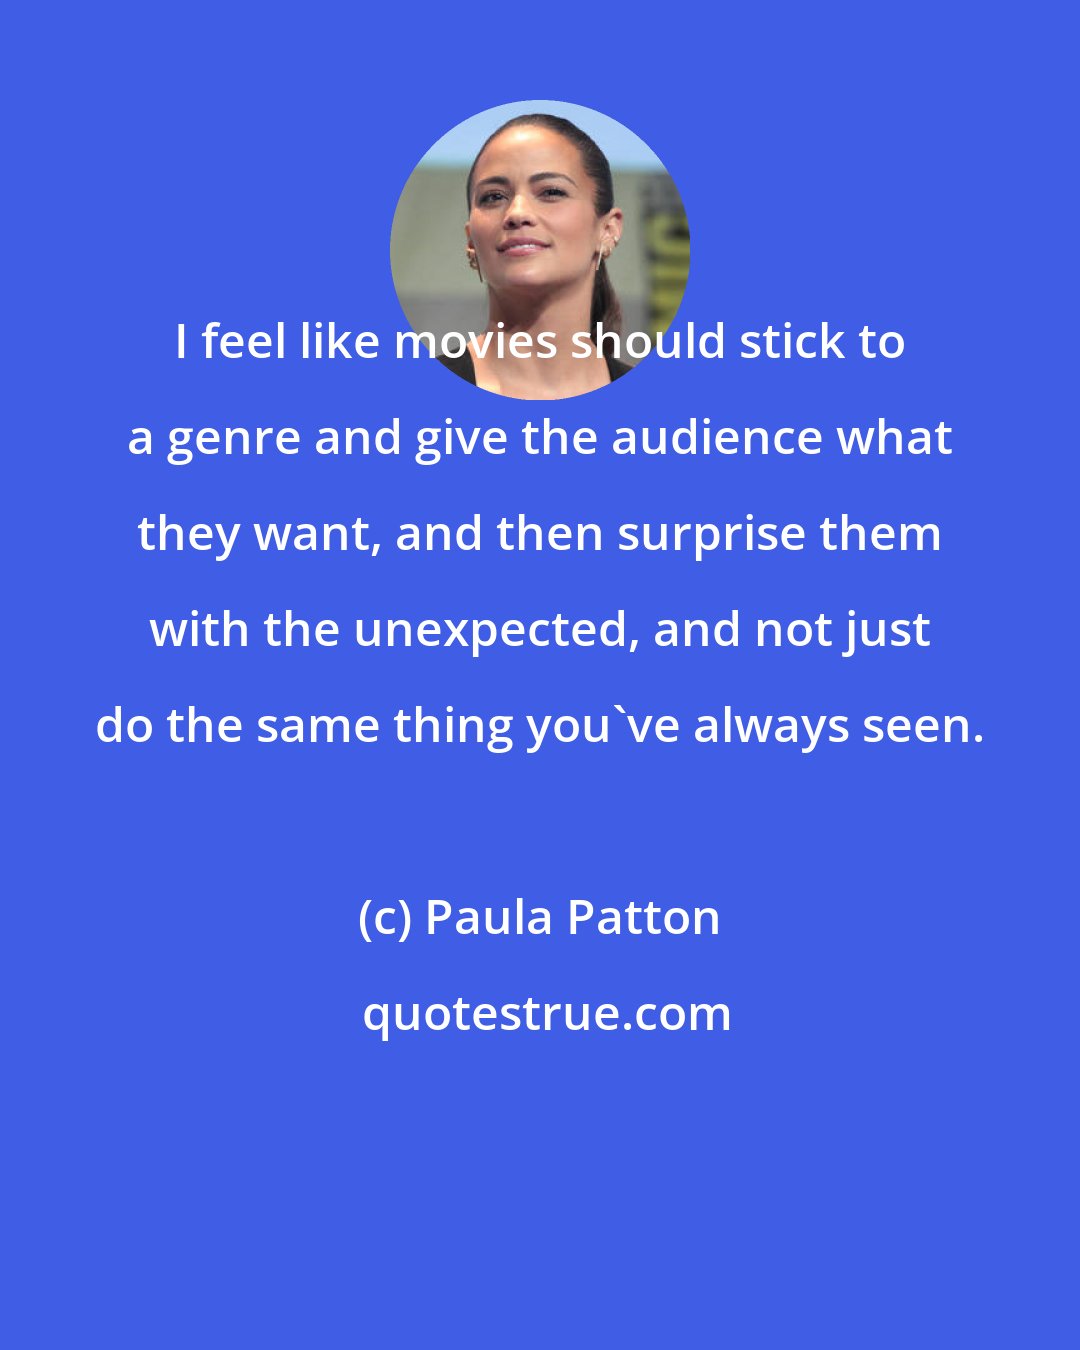 Paula Patton: I feel like movies should stick to a genre and give the audience what they want, and then surprise them with the unexpected, and not just do the same thing you've always seen.